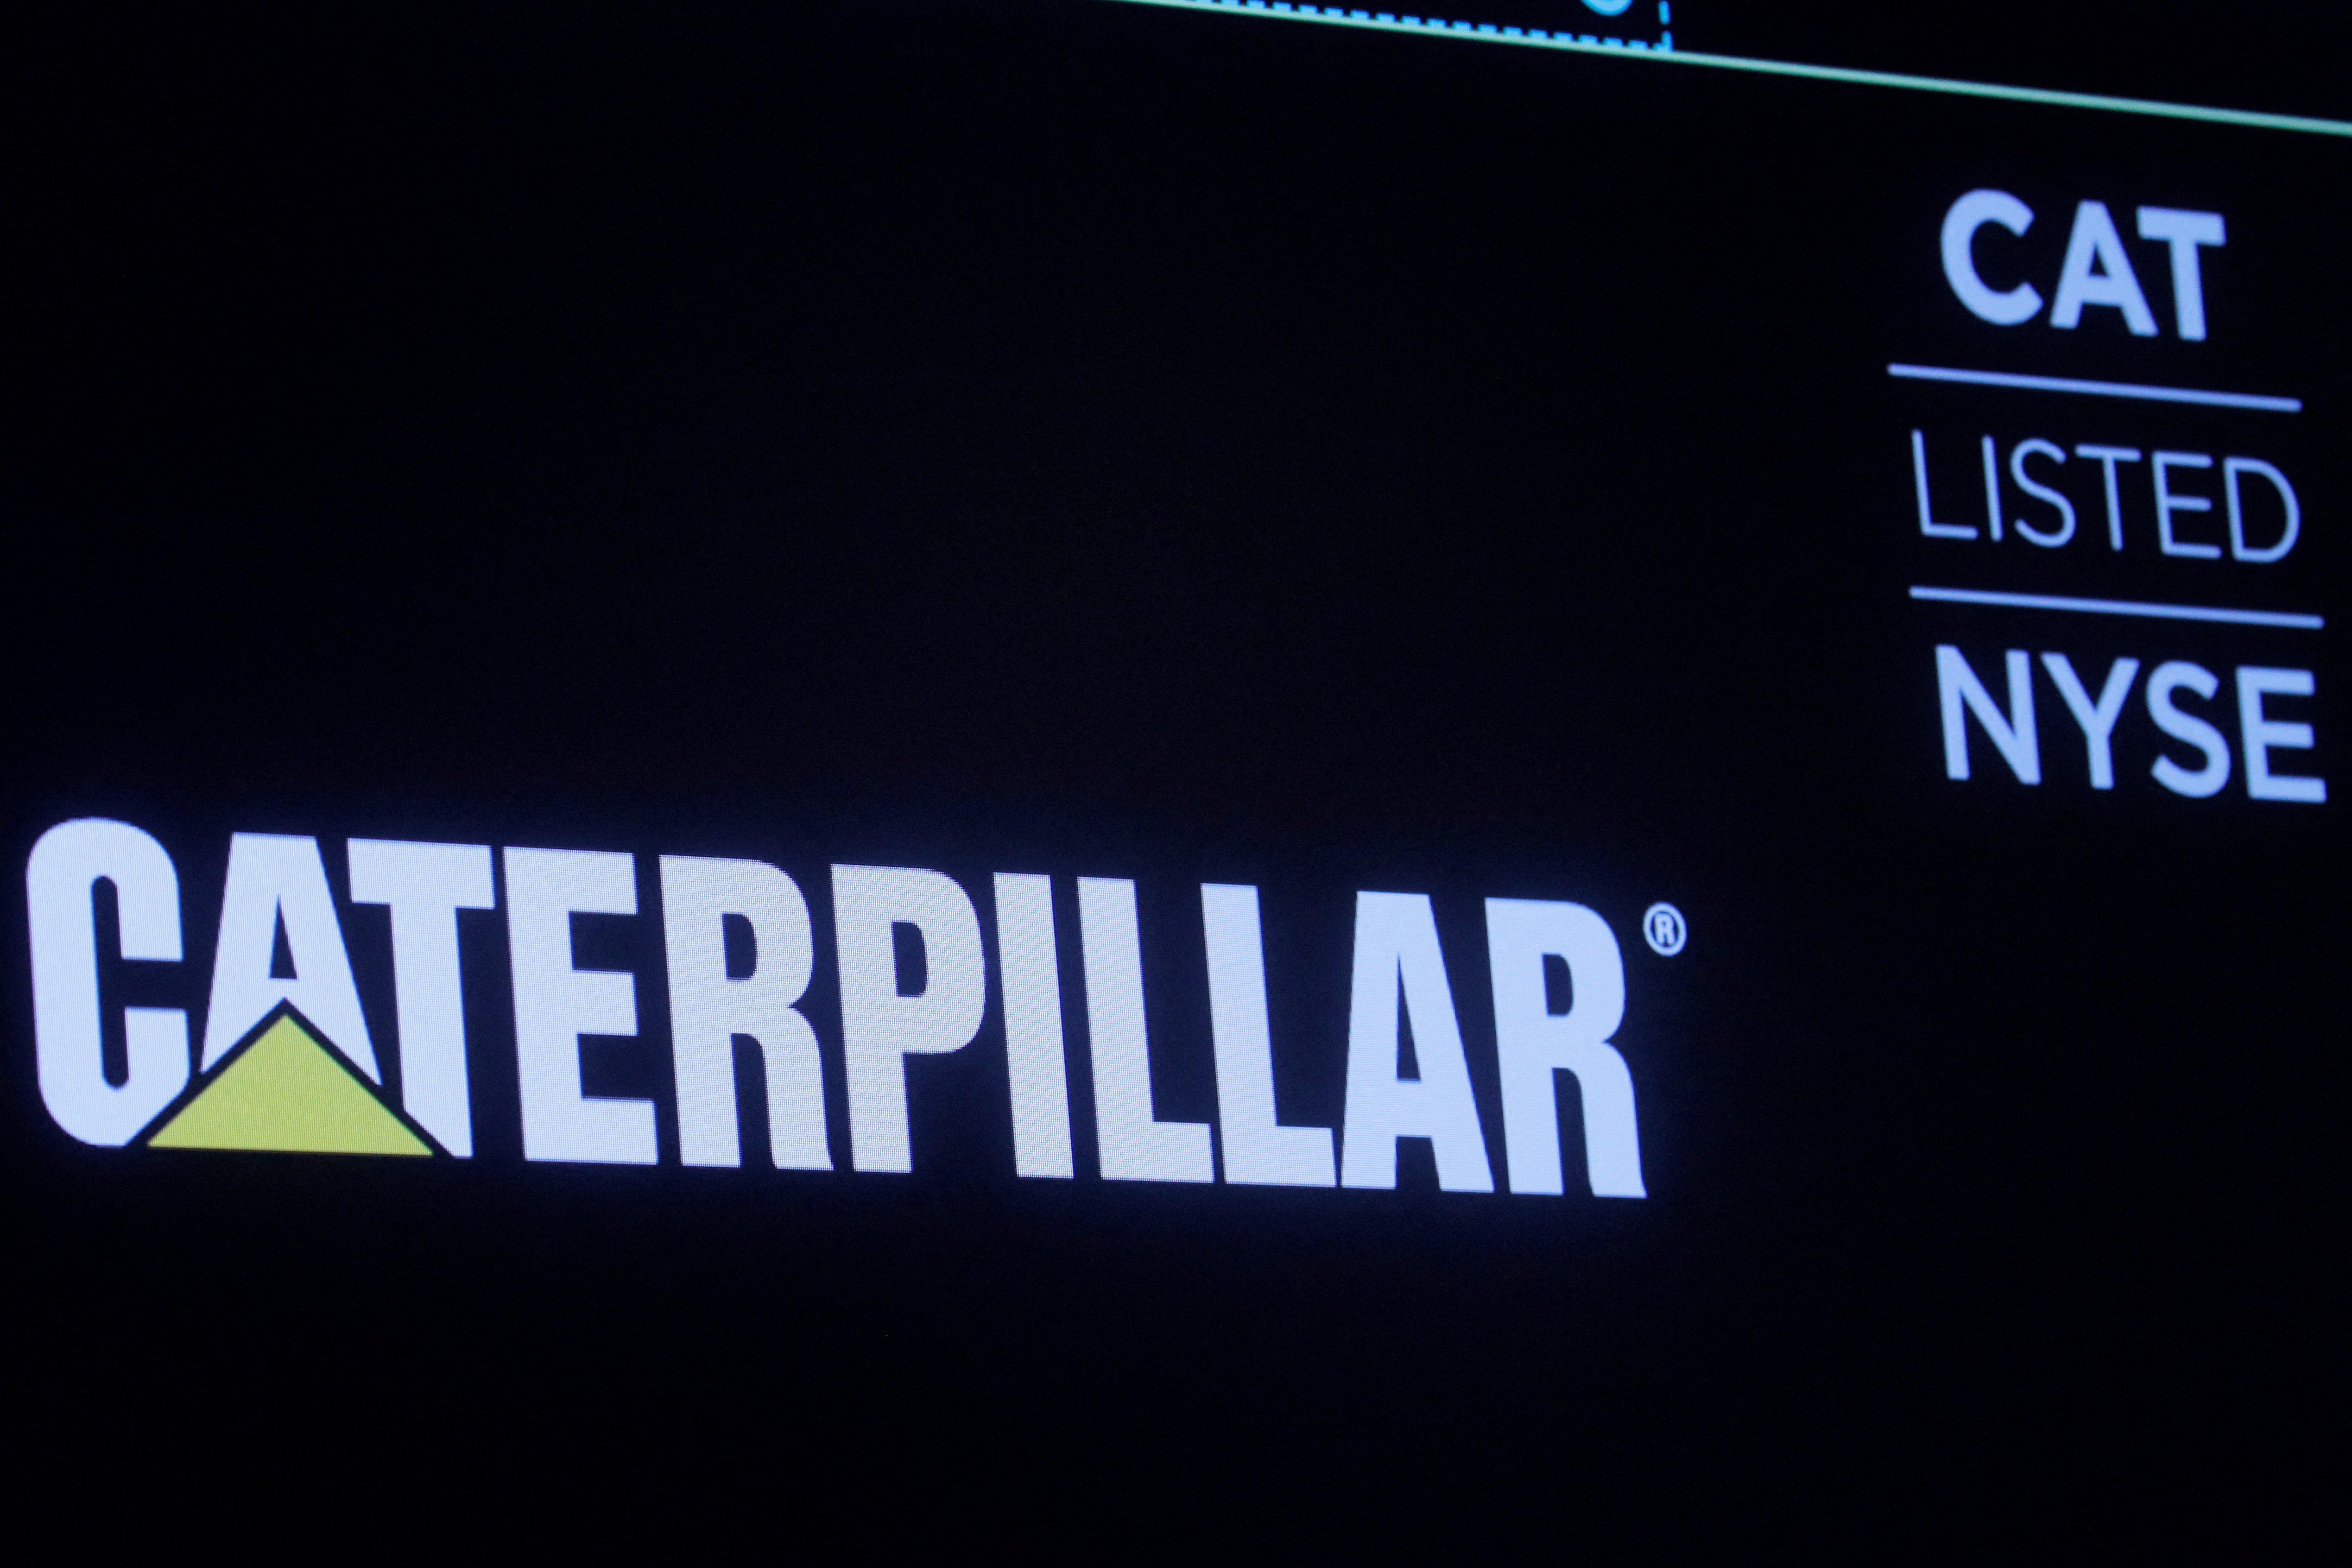 The company logo for Caterpillar Inc. is displayed on a screen at the NYSE in New York